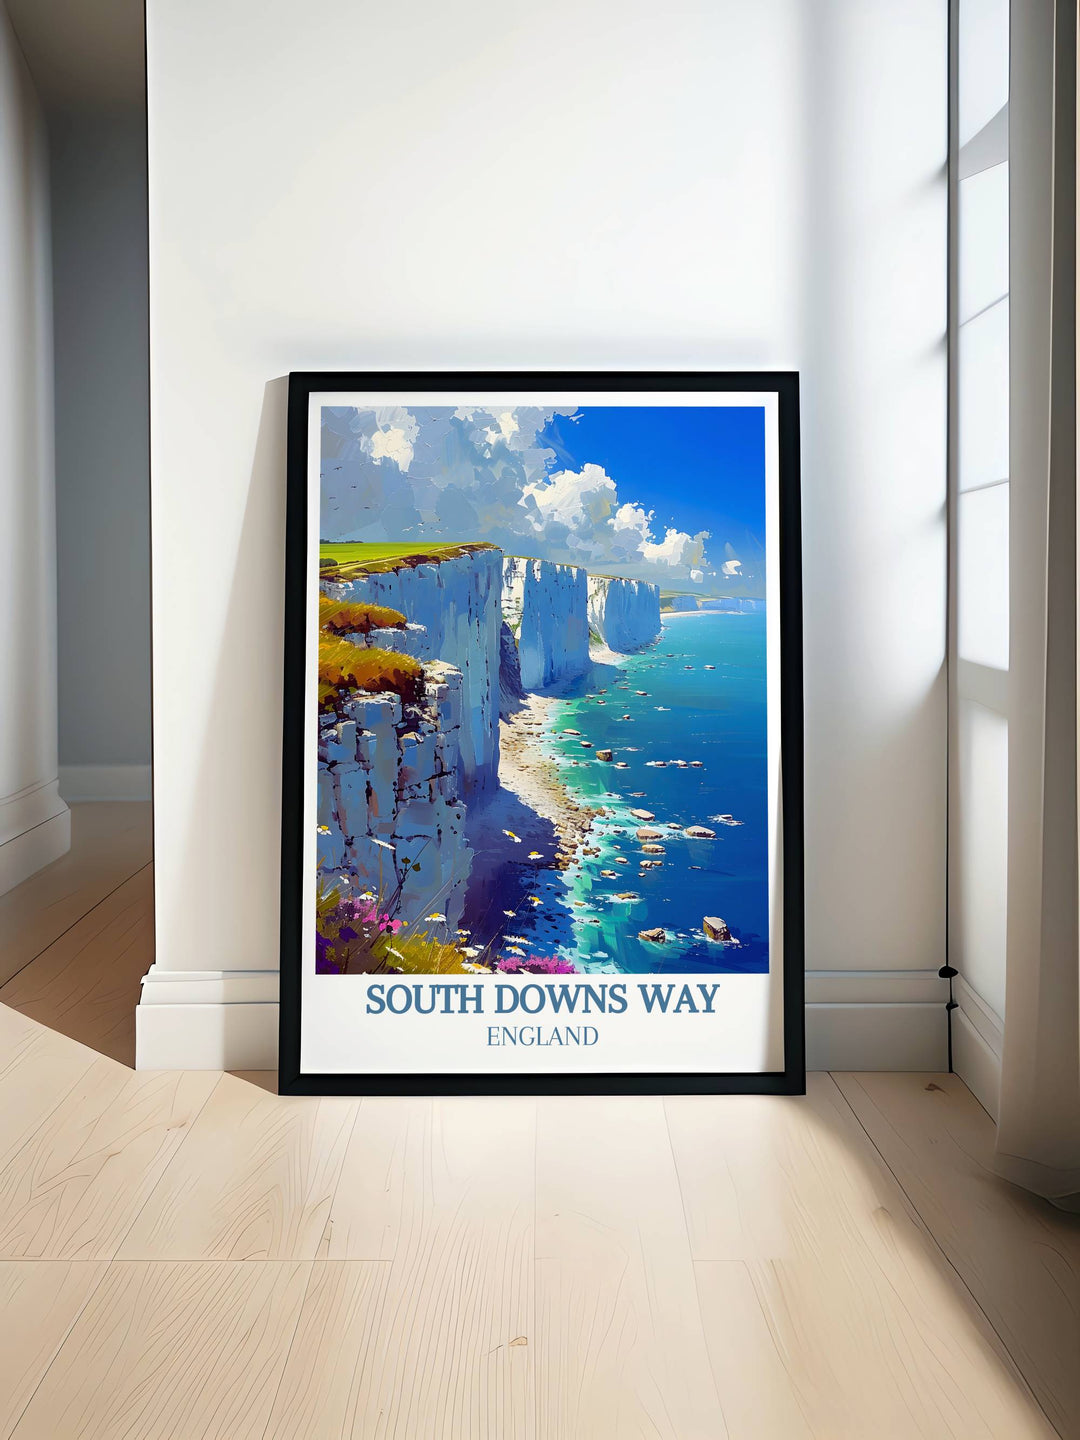 Fine art print of the South Downs Way showcasing the rolling hills and lush landscapes of this iconic English national trail, perfect for adding a touch of nature to your home decor